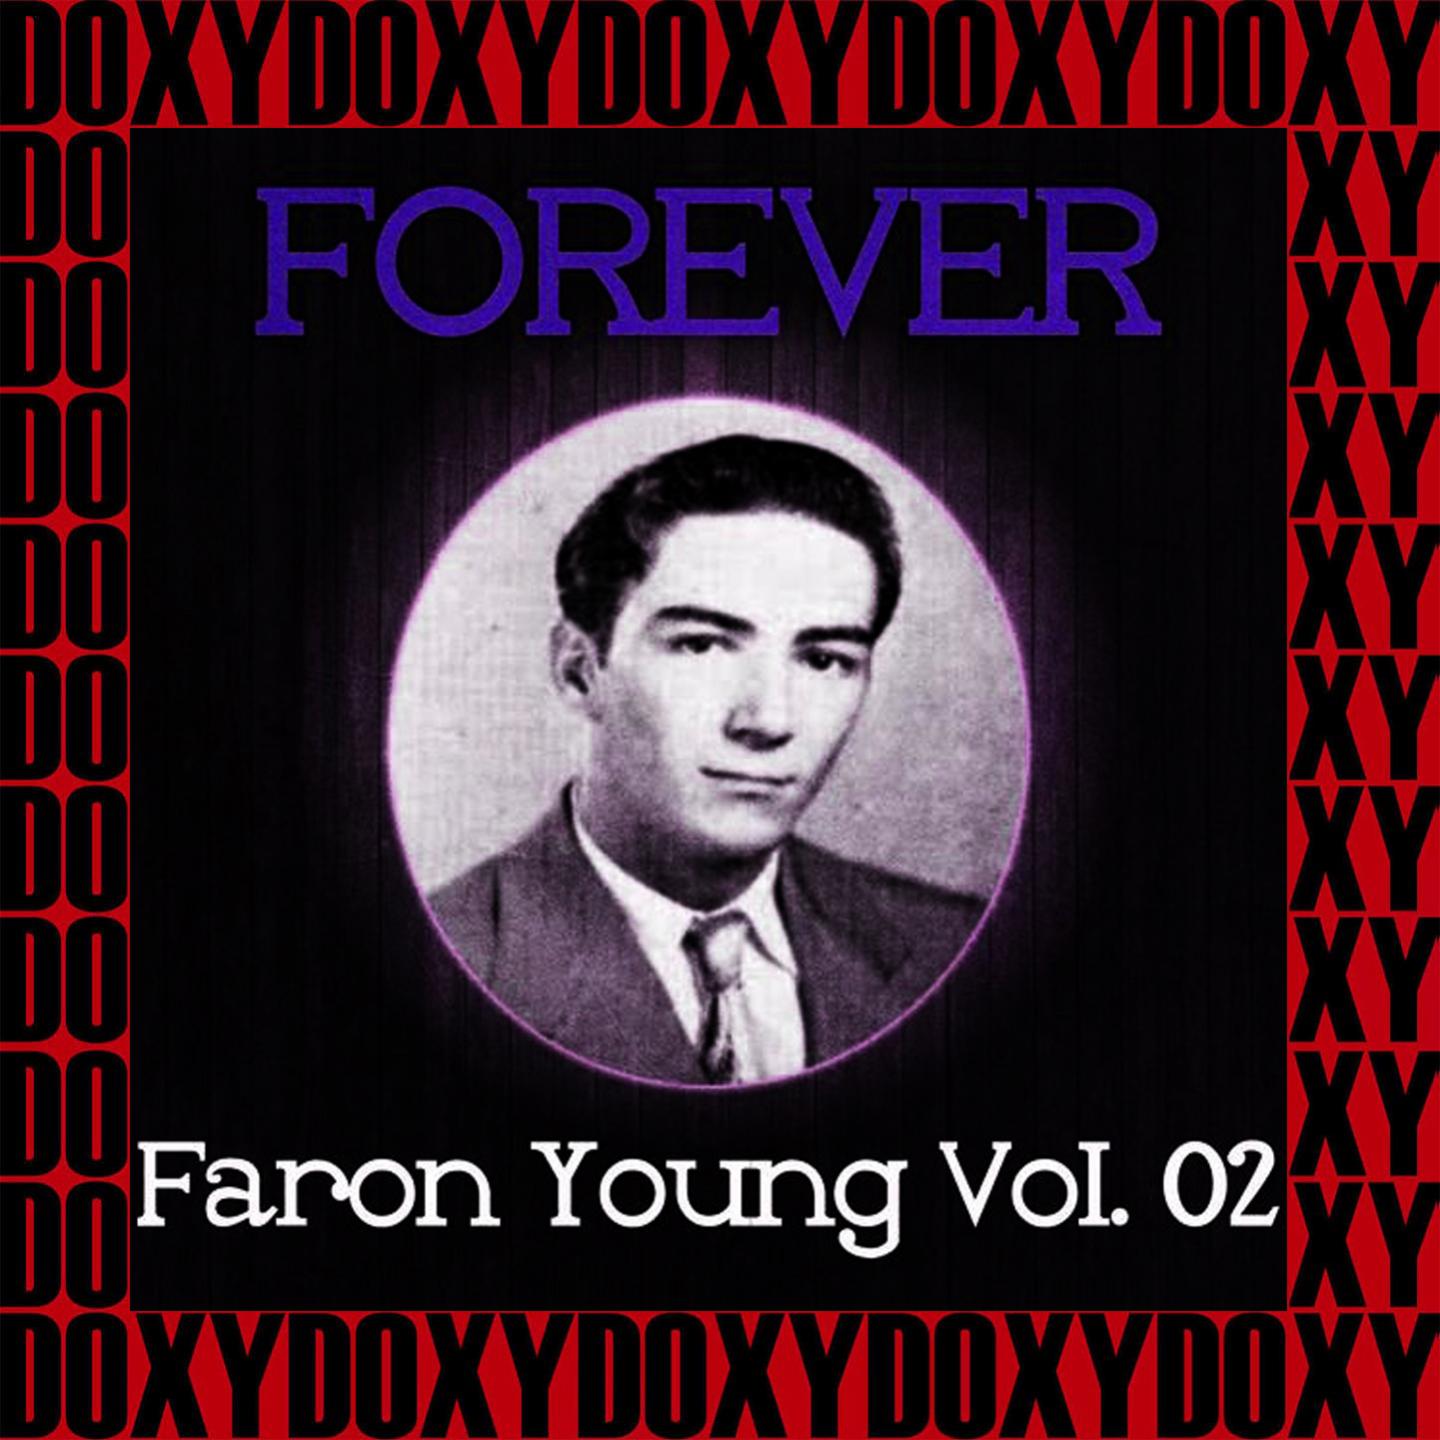 Forever Faron Young Vol. 2 (Remastered Version) (Doxy Collection)